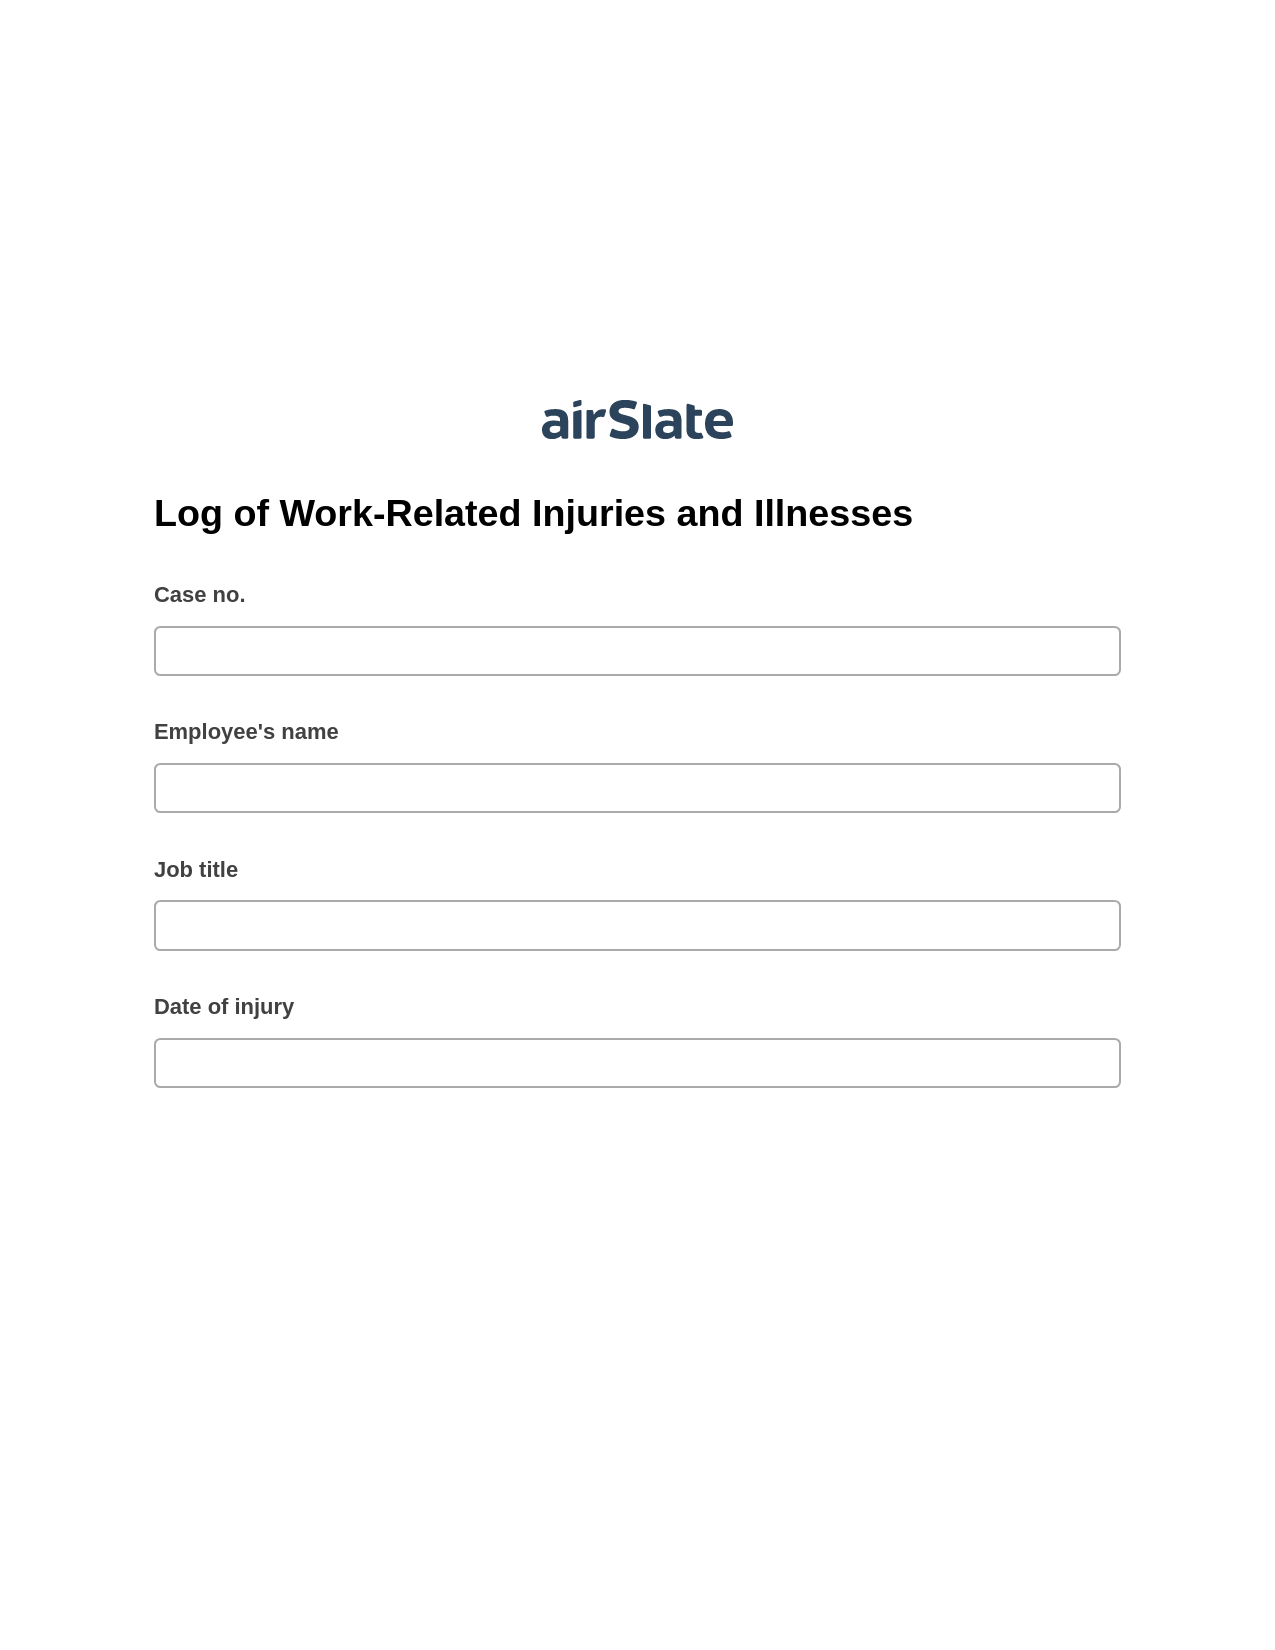 Multirole Log of Work-Related Injuries and Illnesses Pre-fill from Salesforce Records with SOQL Bot, Jira Bot, Box Bot